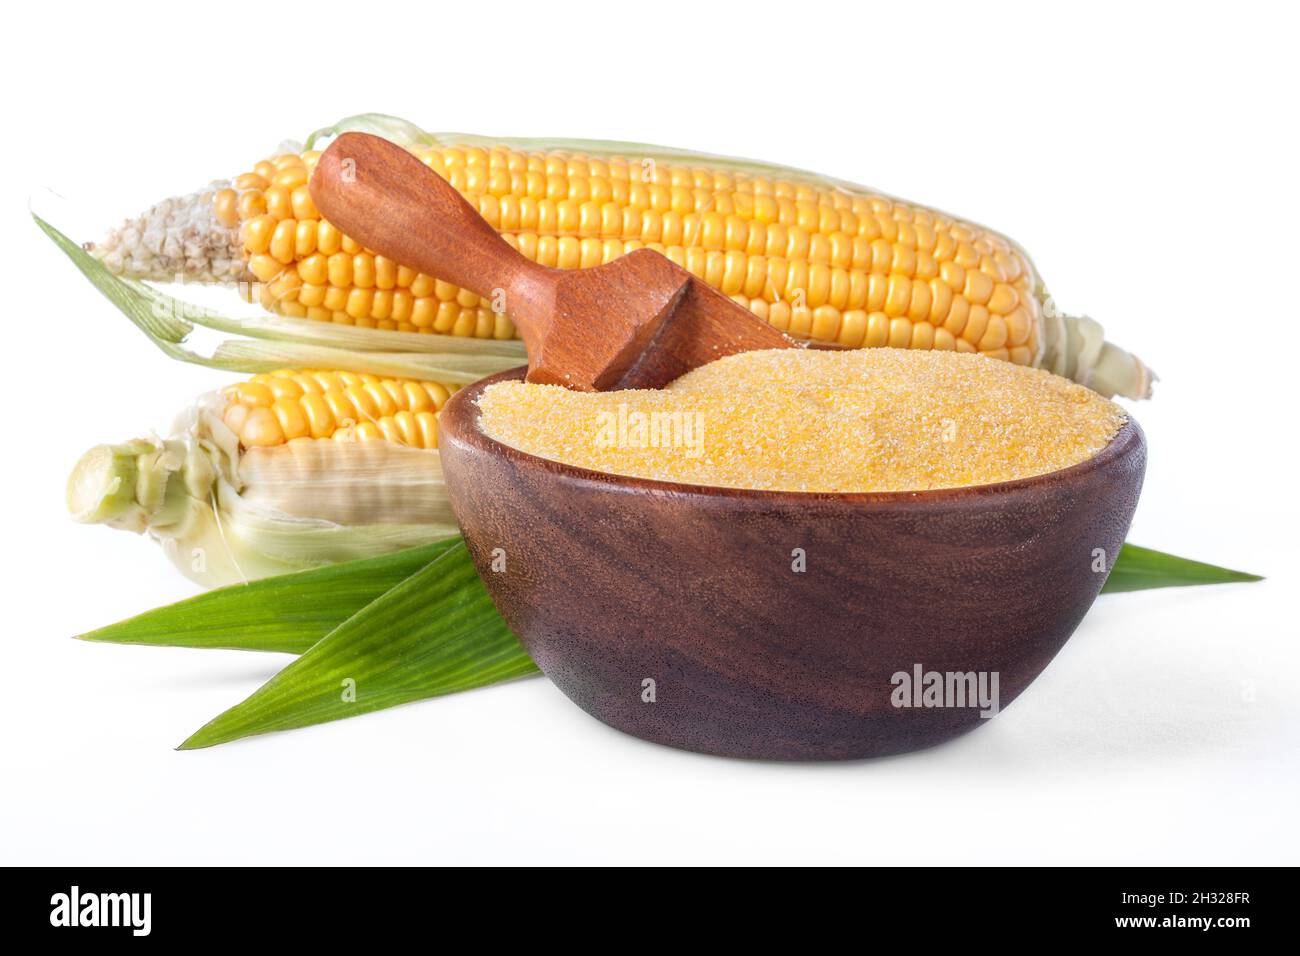 corn with grits polenta in a wooden bowl on white Stock Photo